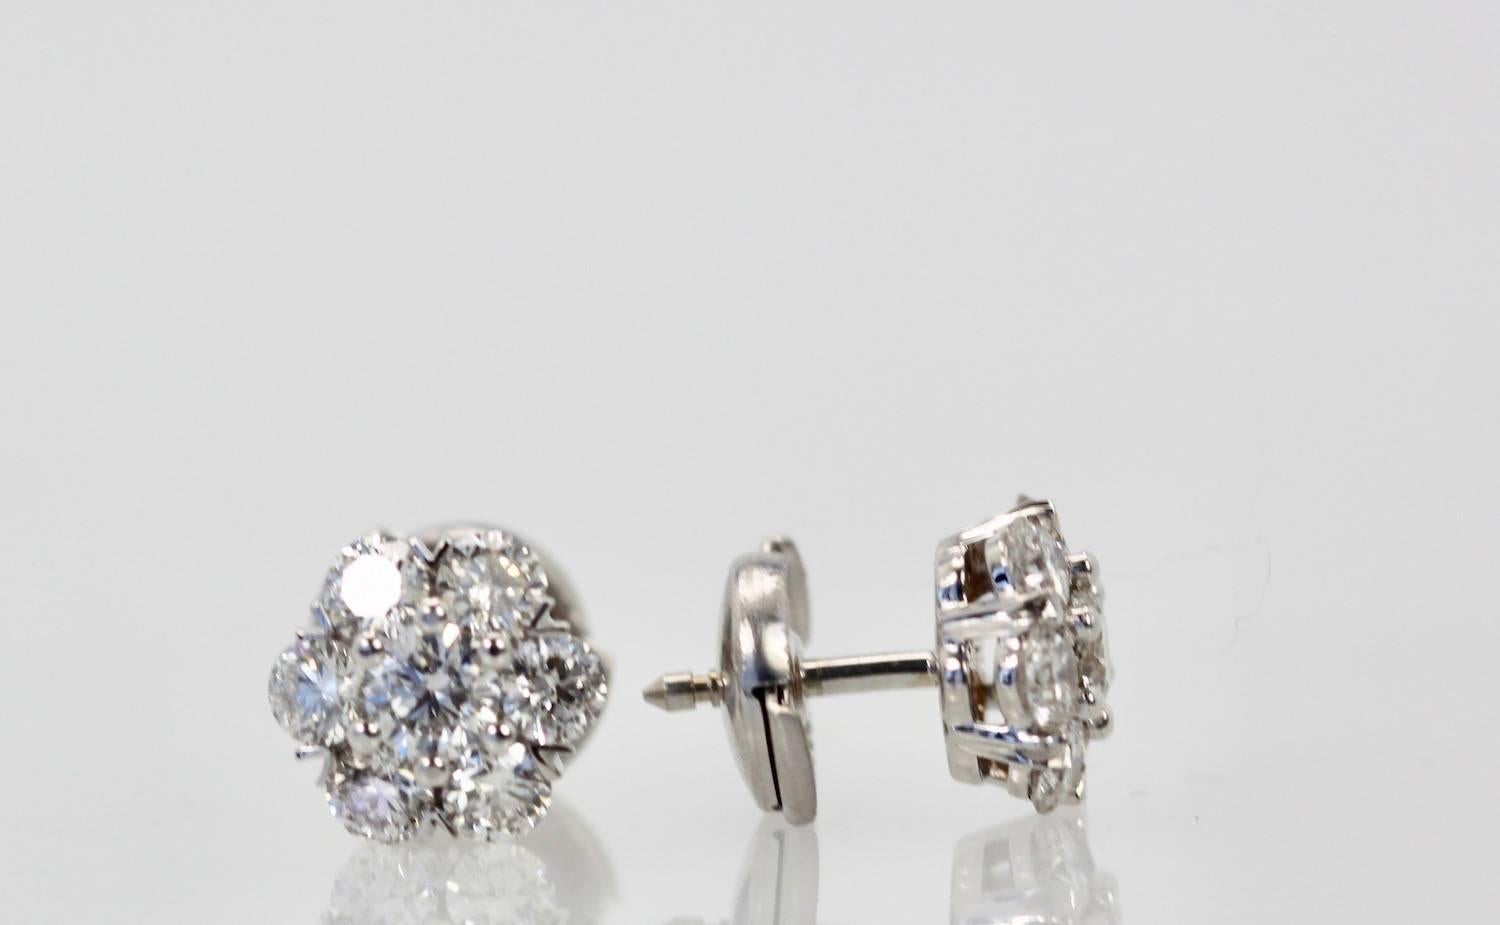 These gorgeous VCA Earrings are as classic as it gets.  This is the small model of Fleurette earrings currently retailing for $15,800.  These earrings have 14 stones, 7 stones each of DEF color Diamonds with a IF to VVS clarity range.  These stones